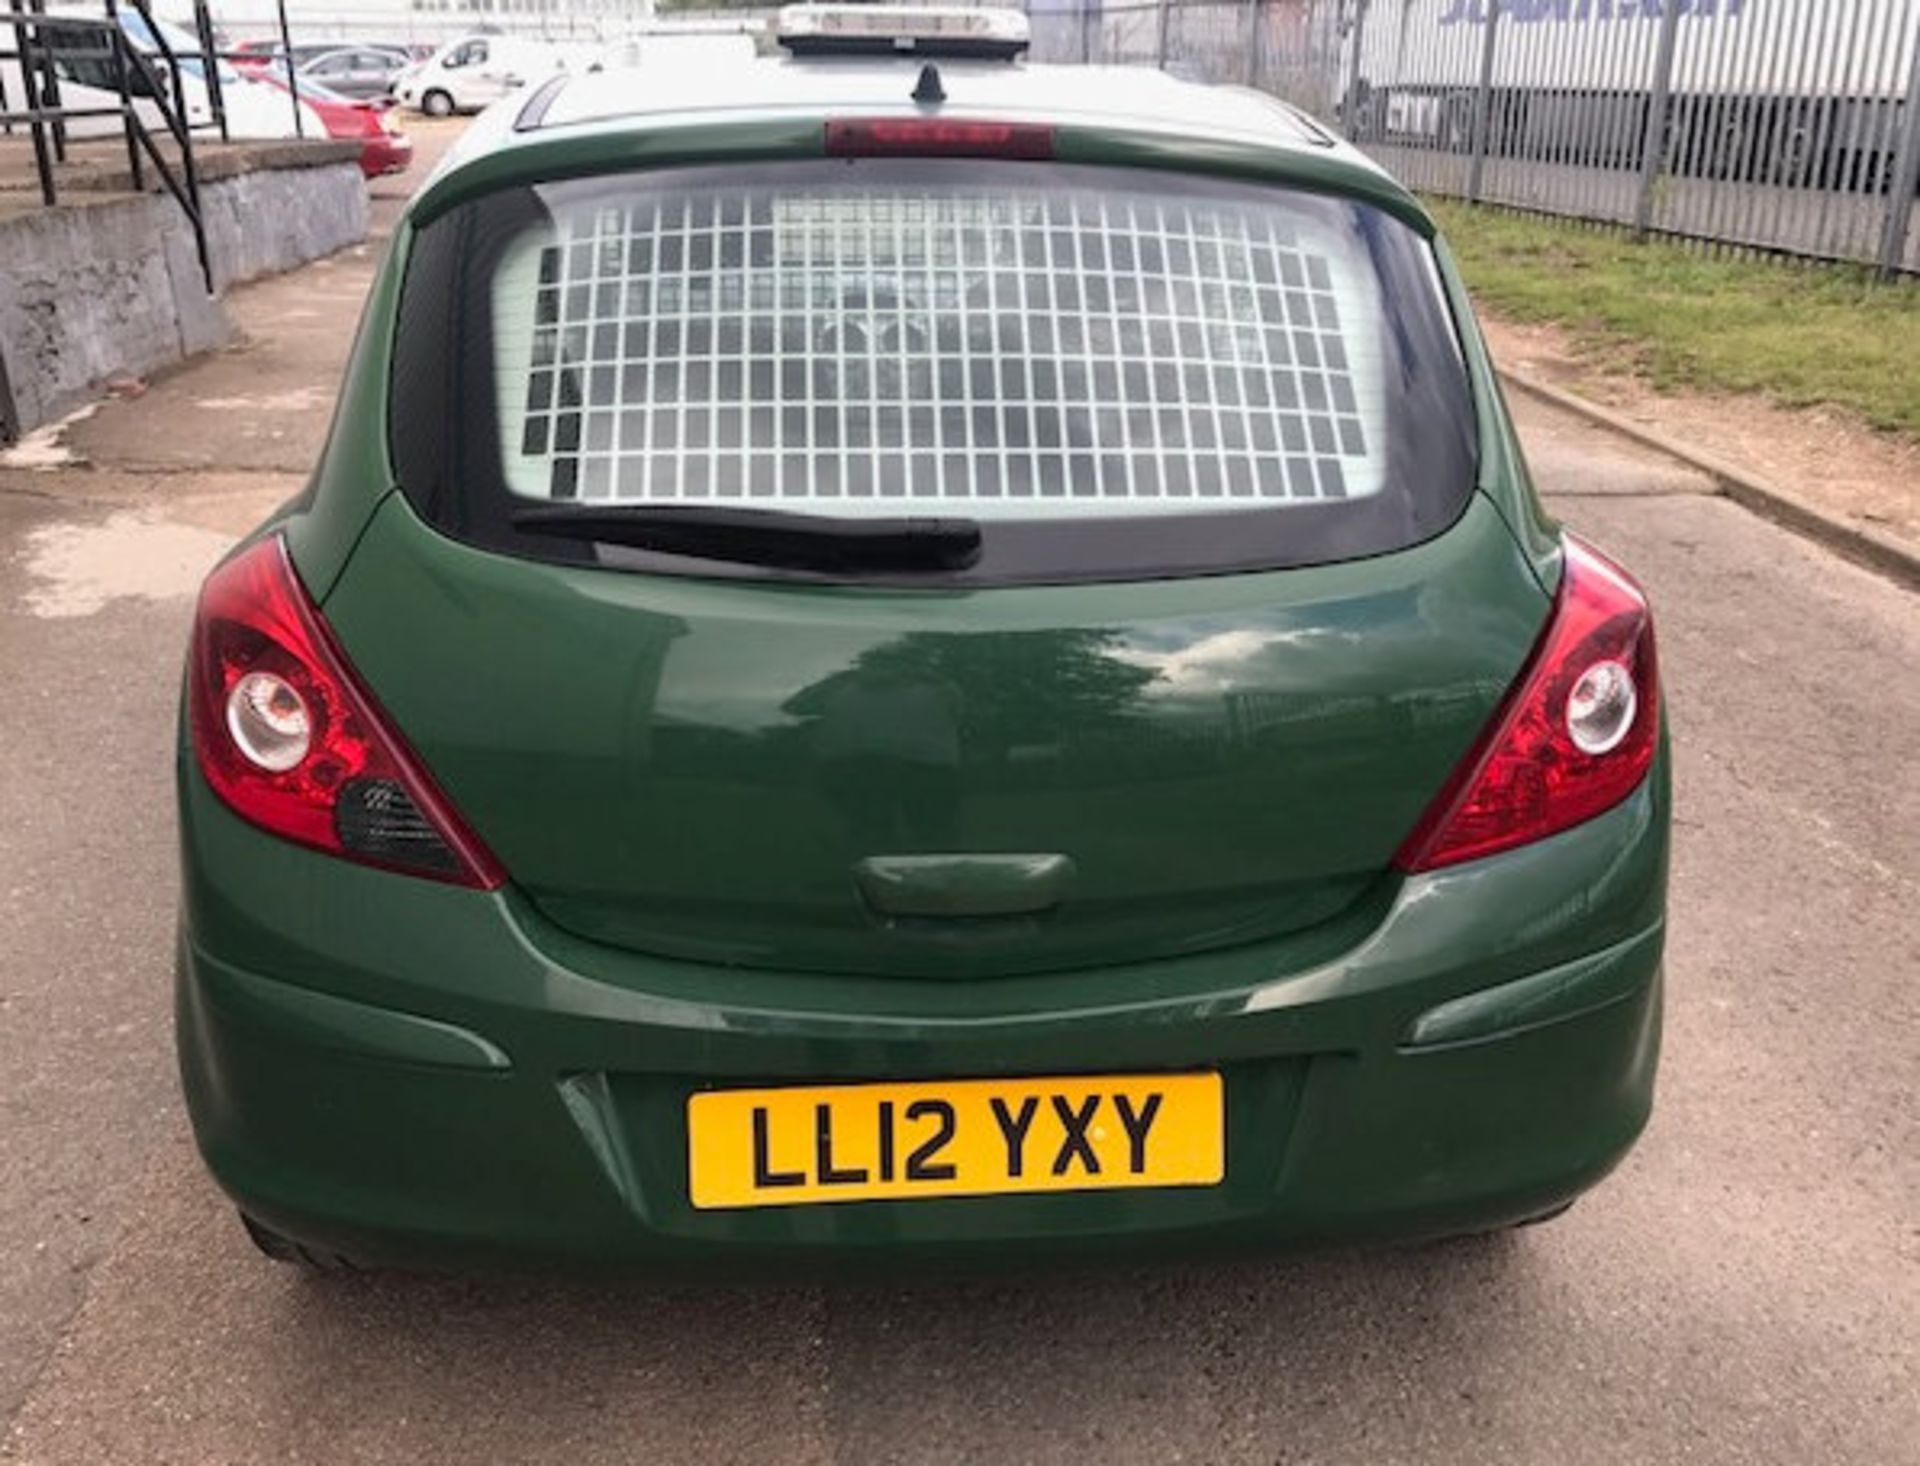 2012 Vauxhall Corsa 1.3 CDTI 3 Dr Panel Van - CL505 - Location: Corby, NorthamptonshireDescription - Image 11 of 11